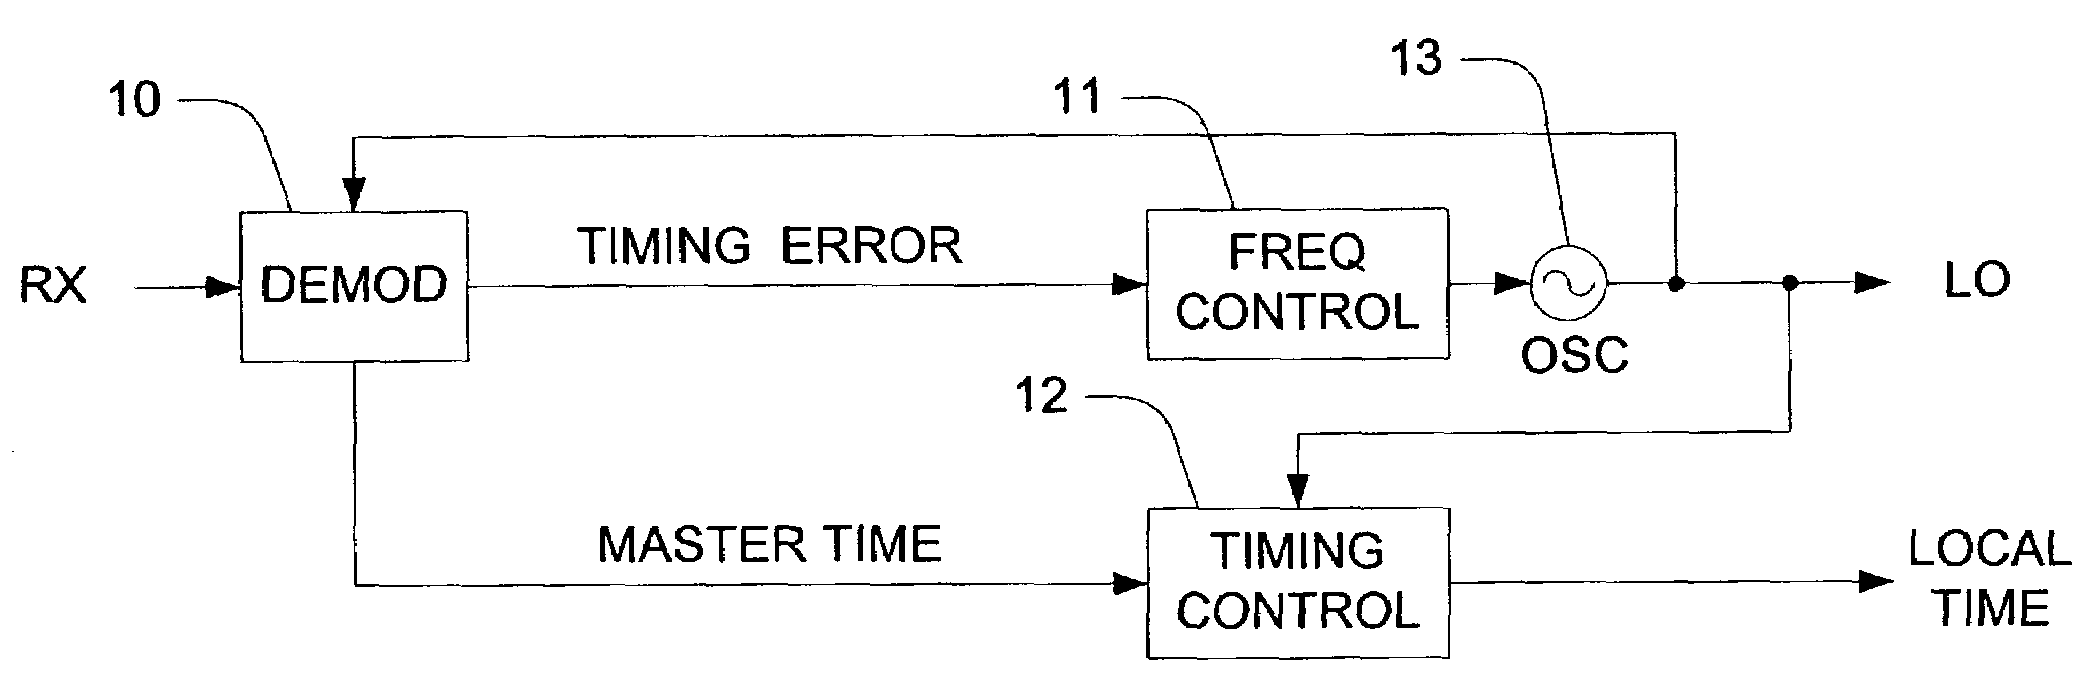 System and method of timing and frequency control in TDM/TDMA networks